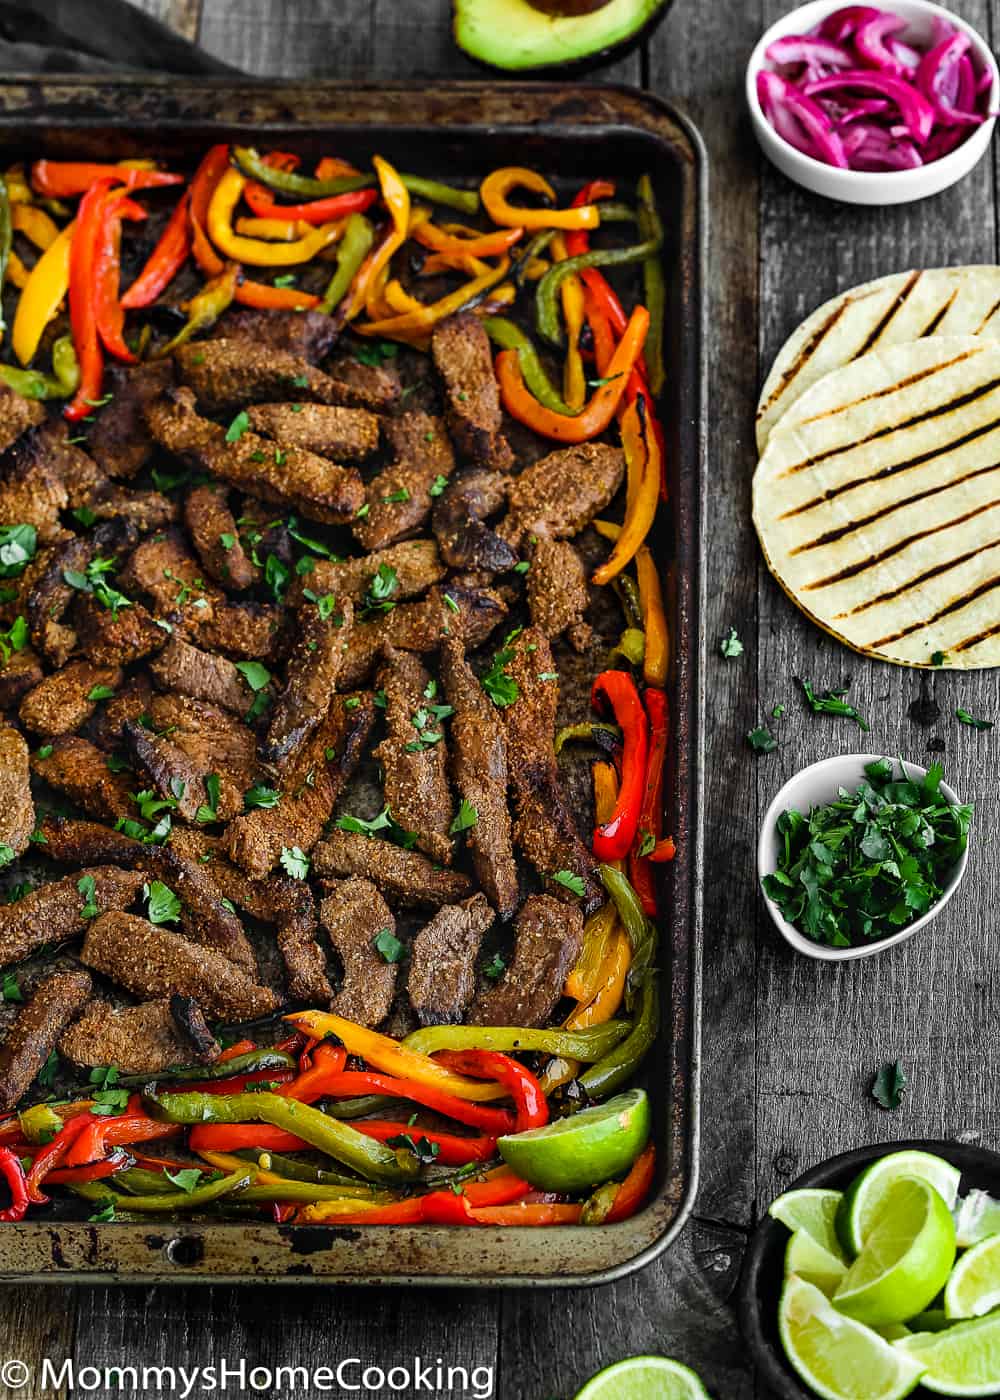 This Easy Sheet Pan Beef Fajitas is zesty, bright, and mess-free! The secret lies in a flavorful marinade. Seasoned beef is oven-broiled on a sheet pan with a mixture of peppers and onions. https://mommyshomecooking.com